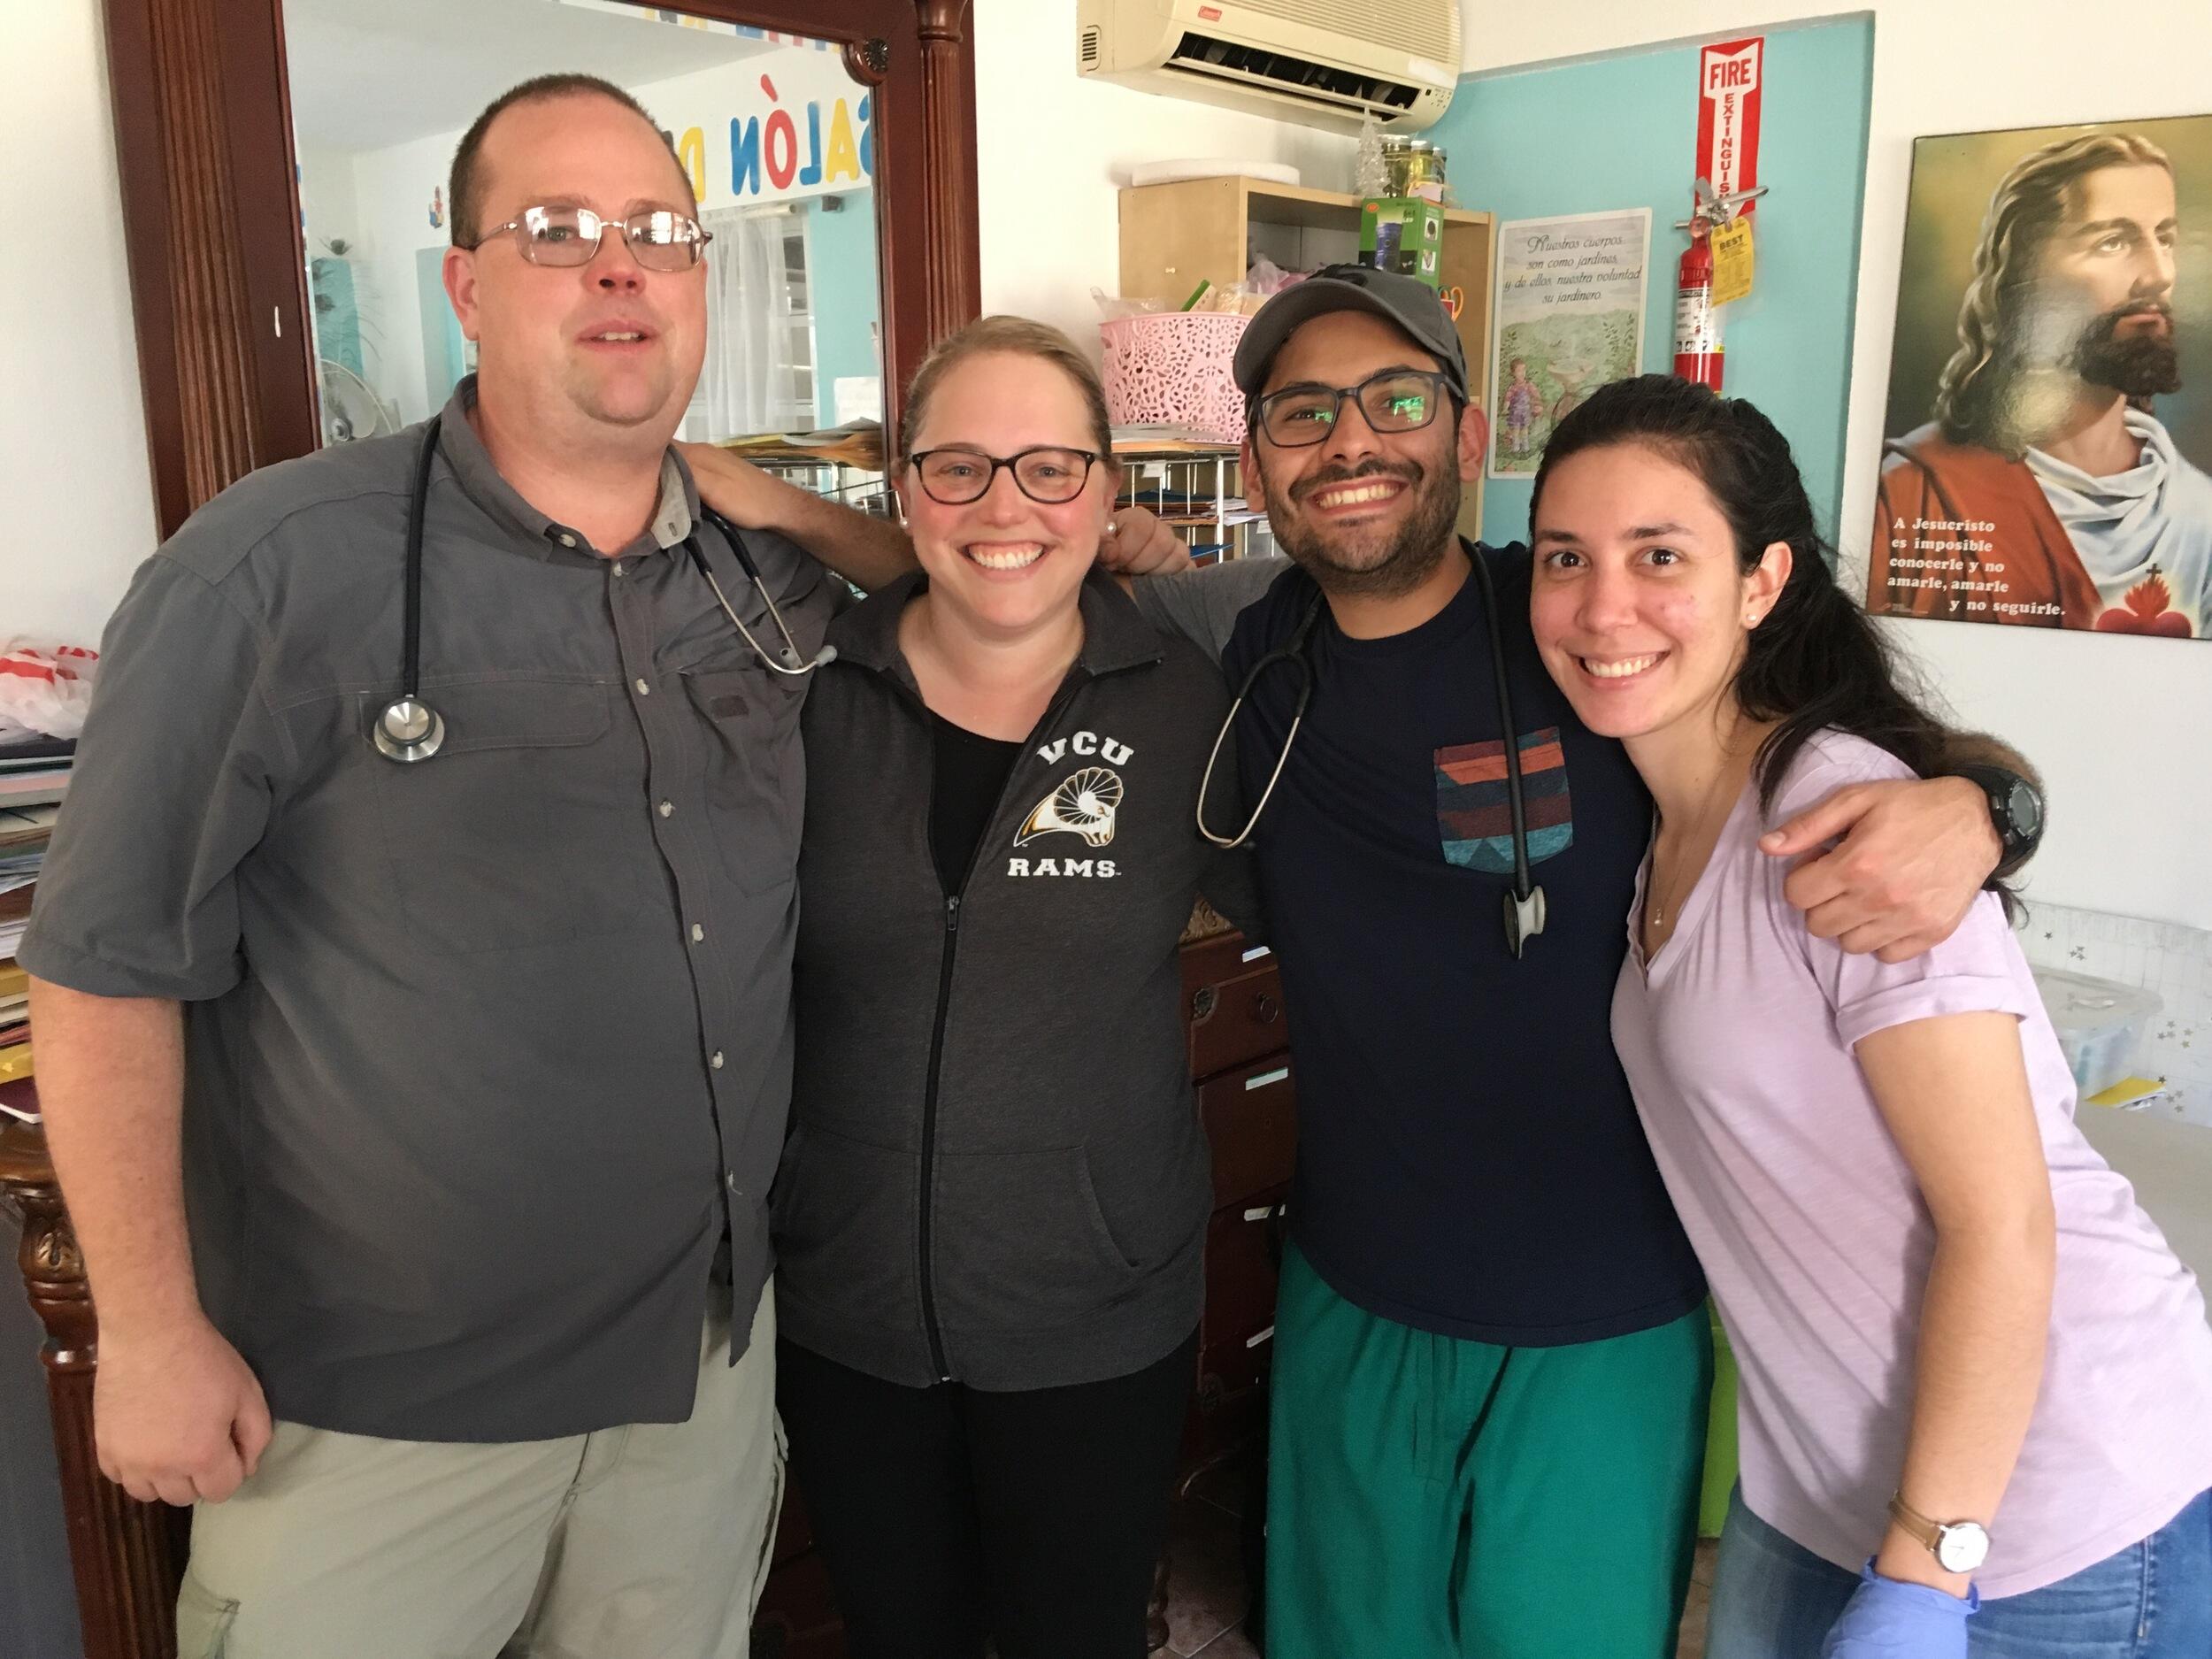 An interdisciplinary team including medical school faculty and students traveled to Puerto Rico to assist with Hurricane Maria relief efforts. (Courtesy photo)